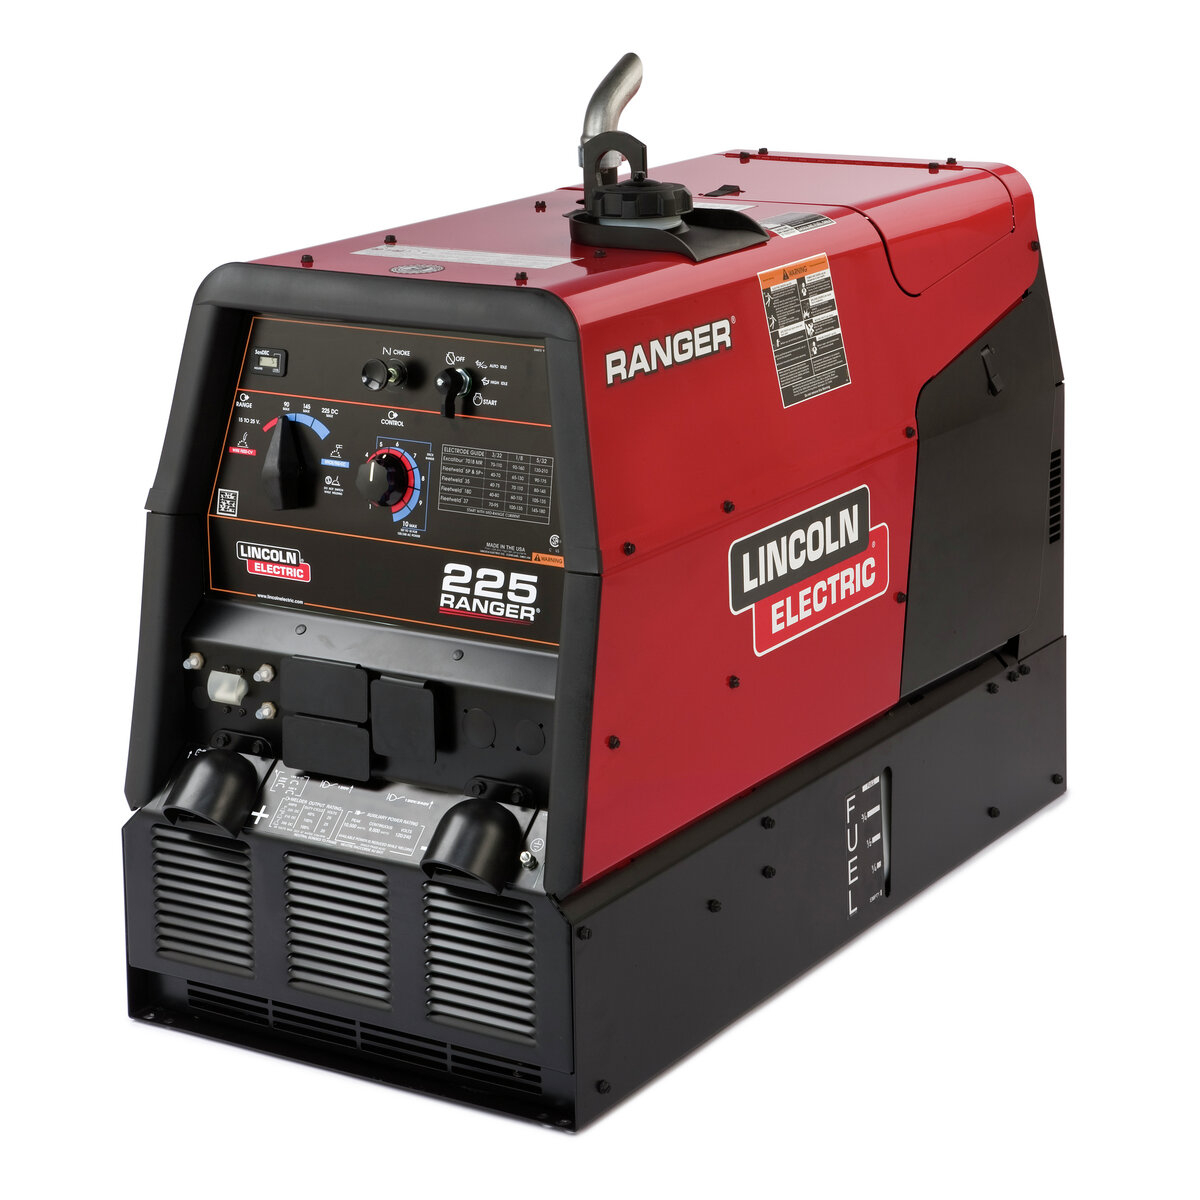 Standard welder/generator with great stick capabilities and AC generator output for the construction, farm, ranch, and maintenance welding applications.